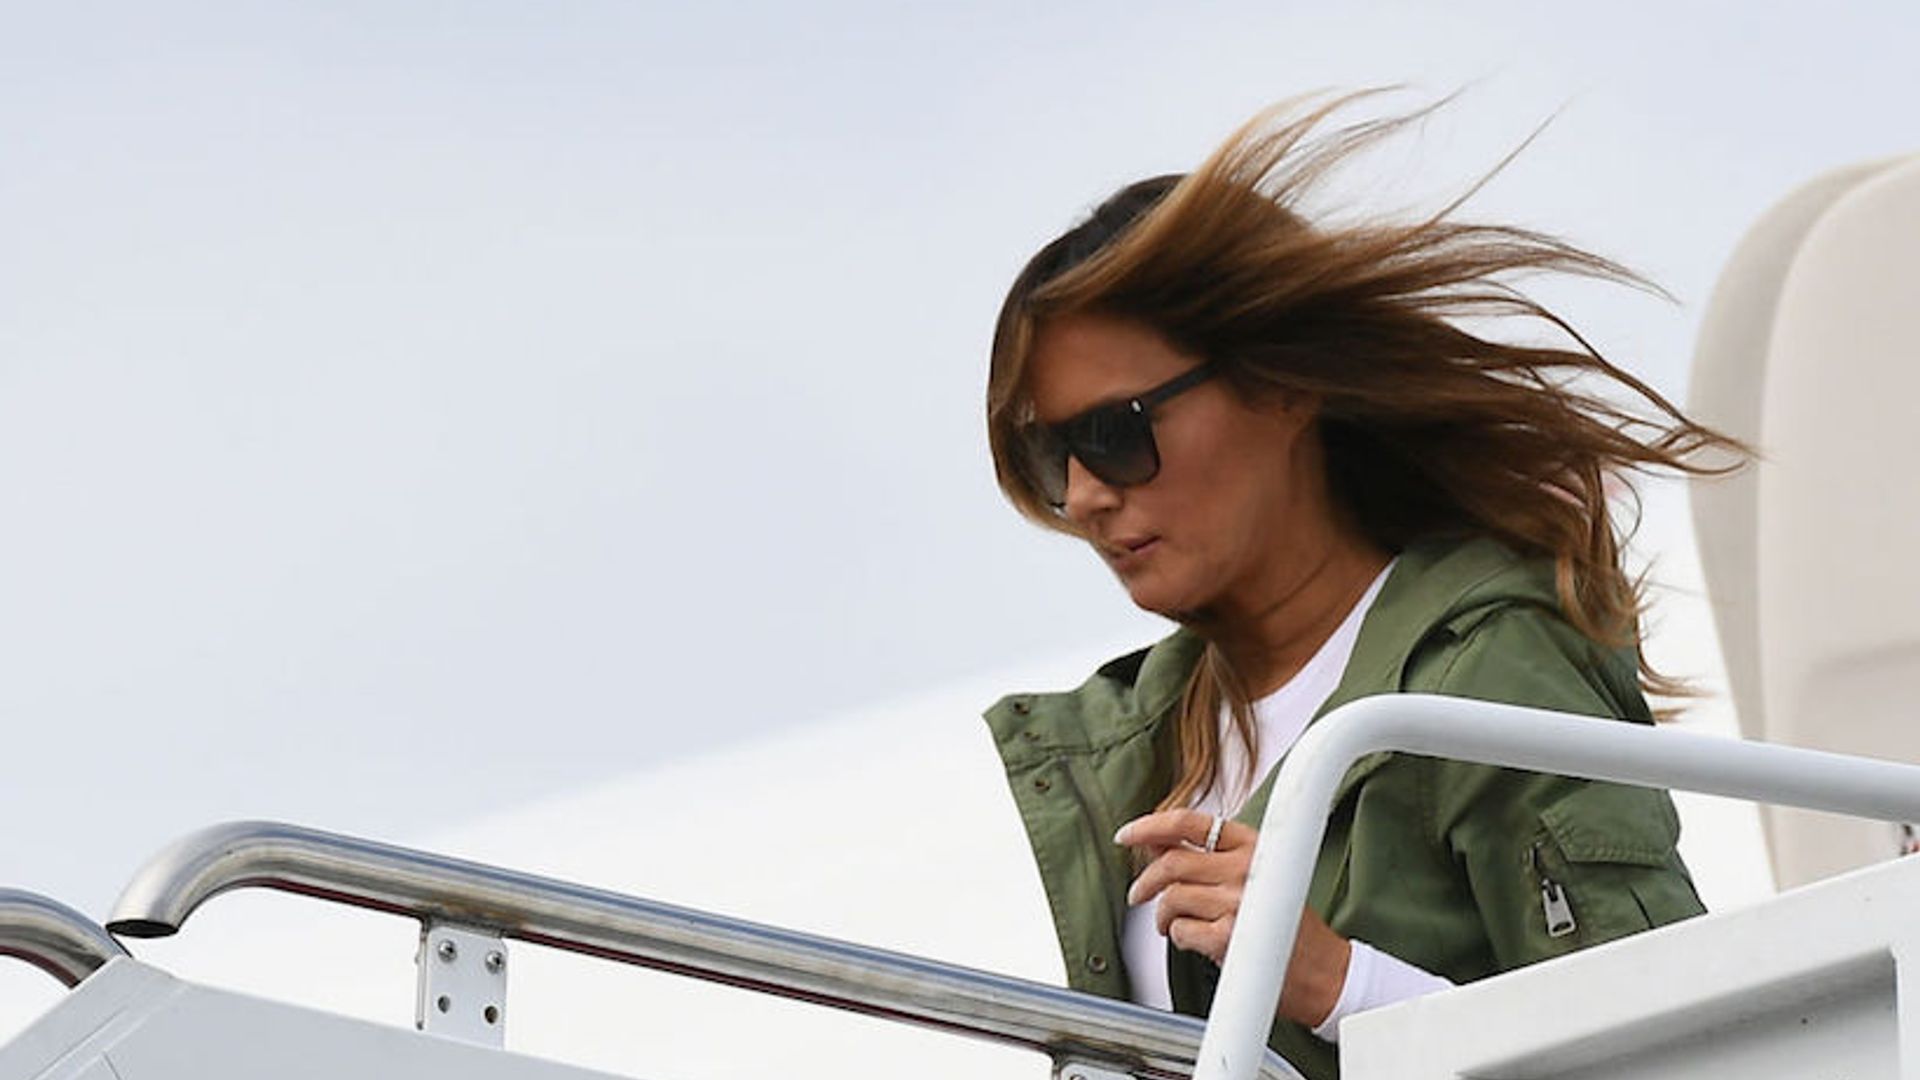 Melania Trump's controversial jacket goes viral – and these celebrities have something to say about it